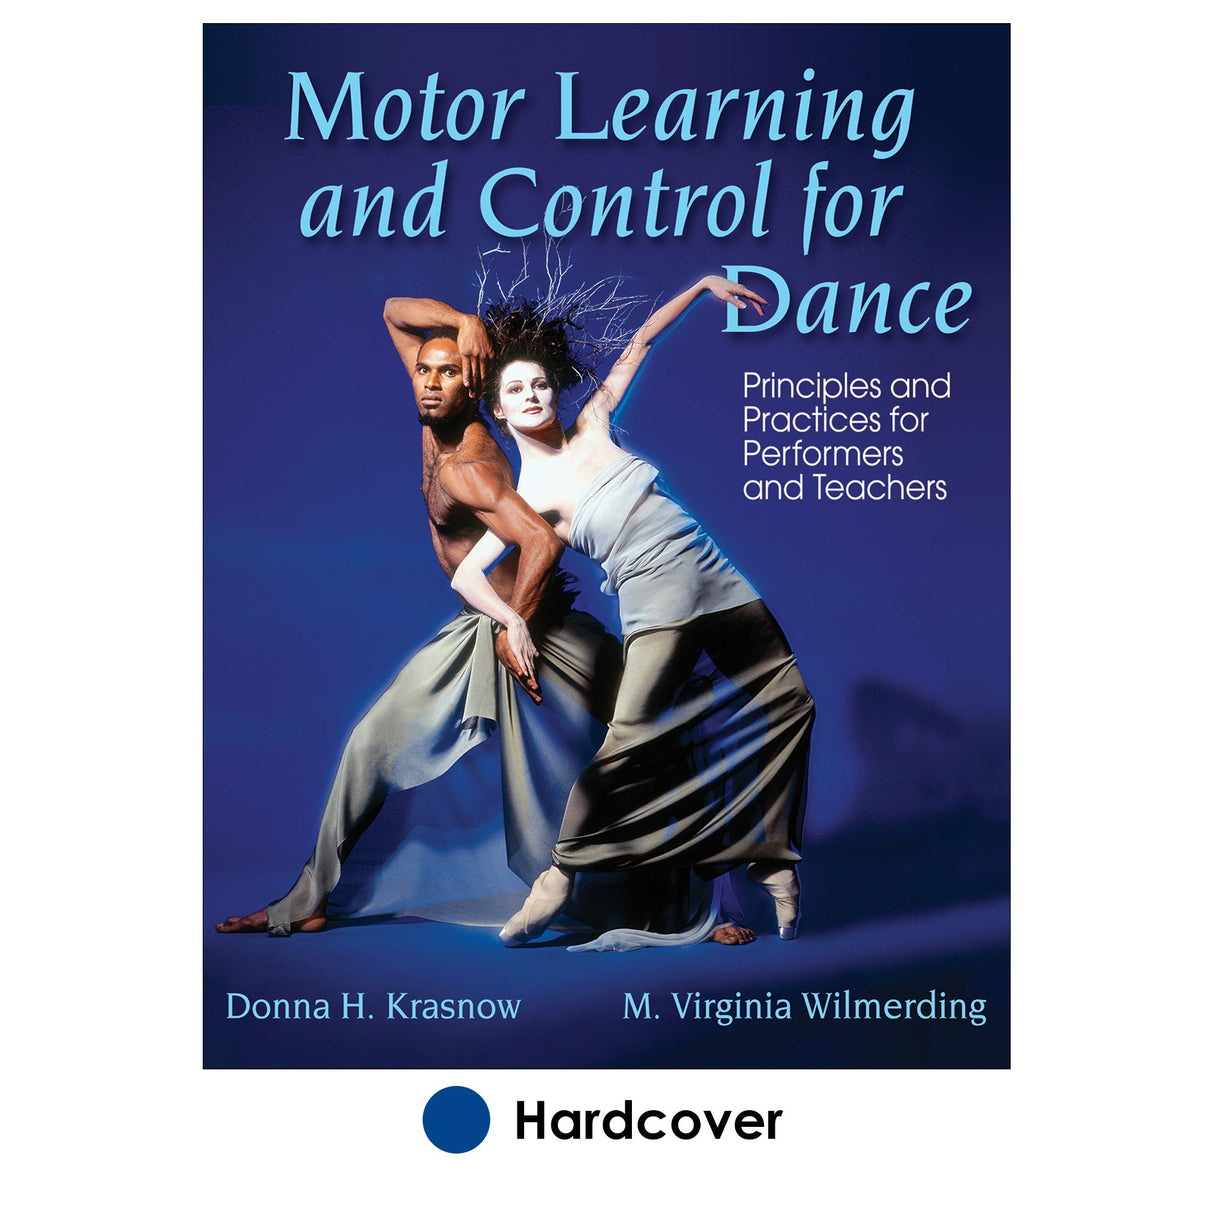 Motor Learning and Control for Dance